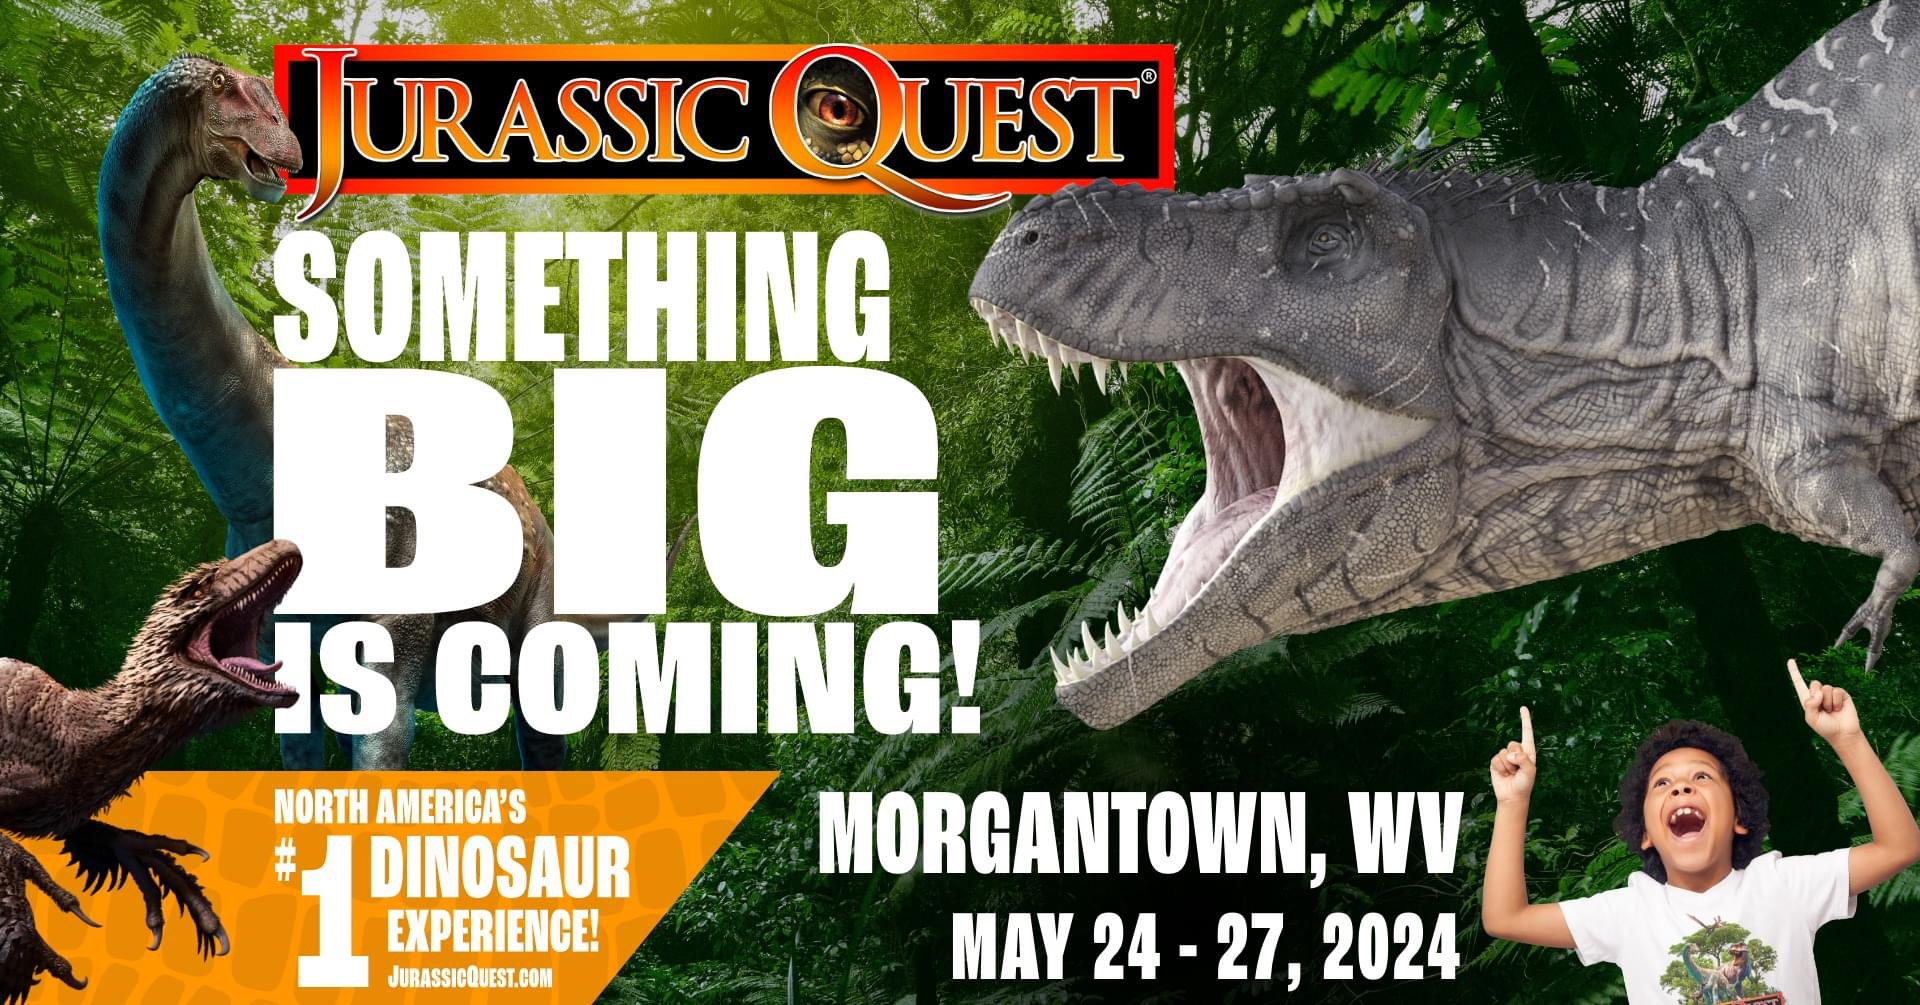 Jurassic Quest is ROARING into Morgantown, WV from May 24 - 27th at Mylan Park! DON’T MISS: * LIFE-SIZE, SKY-SCRAPING DINOSAURS * ONE-OF-A-KIND WALKING DINOSAUR RIDES * LIFE-SIZE T.REX SKULL * INCREDIBLE FOSSILS, including REAL T.rex teeth and Triceratops horn Come join us from May 24-17th at Mylan Park in Morgantown, WV!